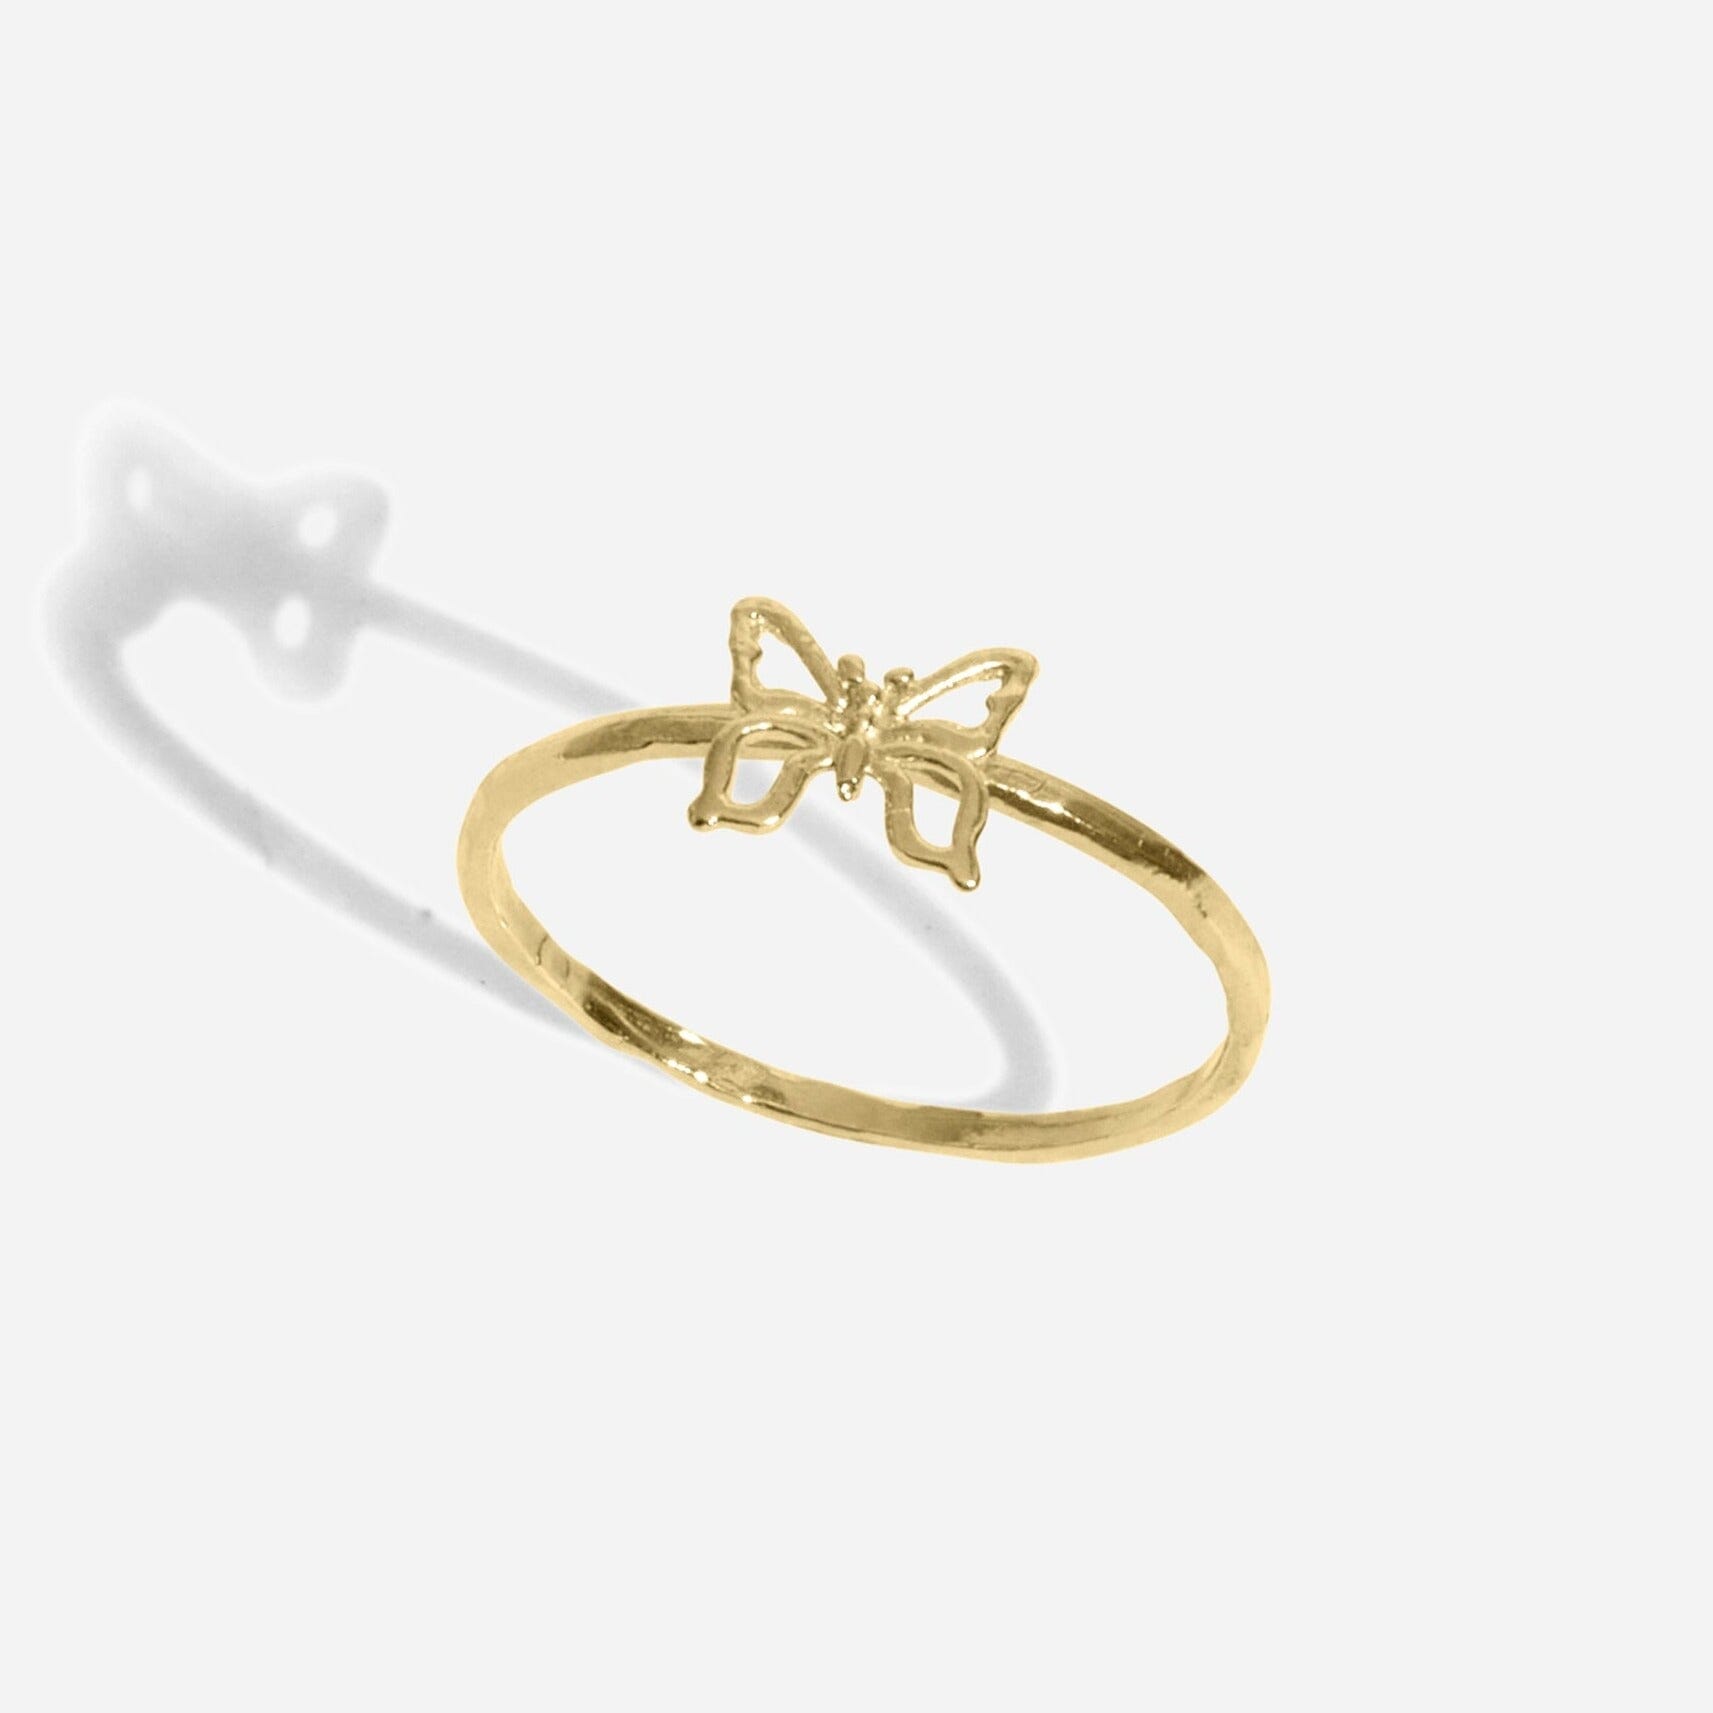 Dainty gold Butterfly Ring handmade in America by Katie Dean Jewelry, as seen on a natural white background, perfect for the dainty minimal jewelry lovers.